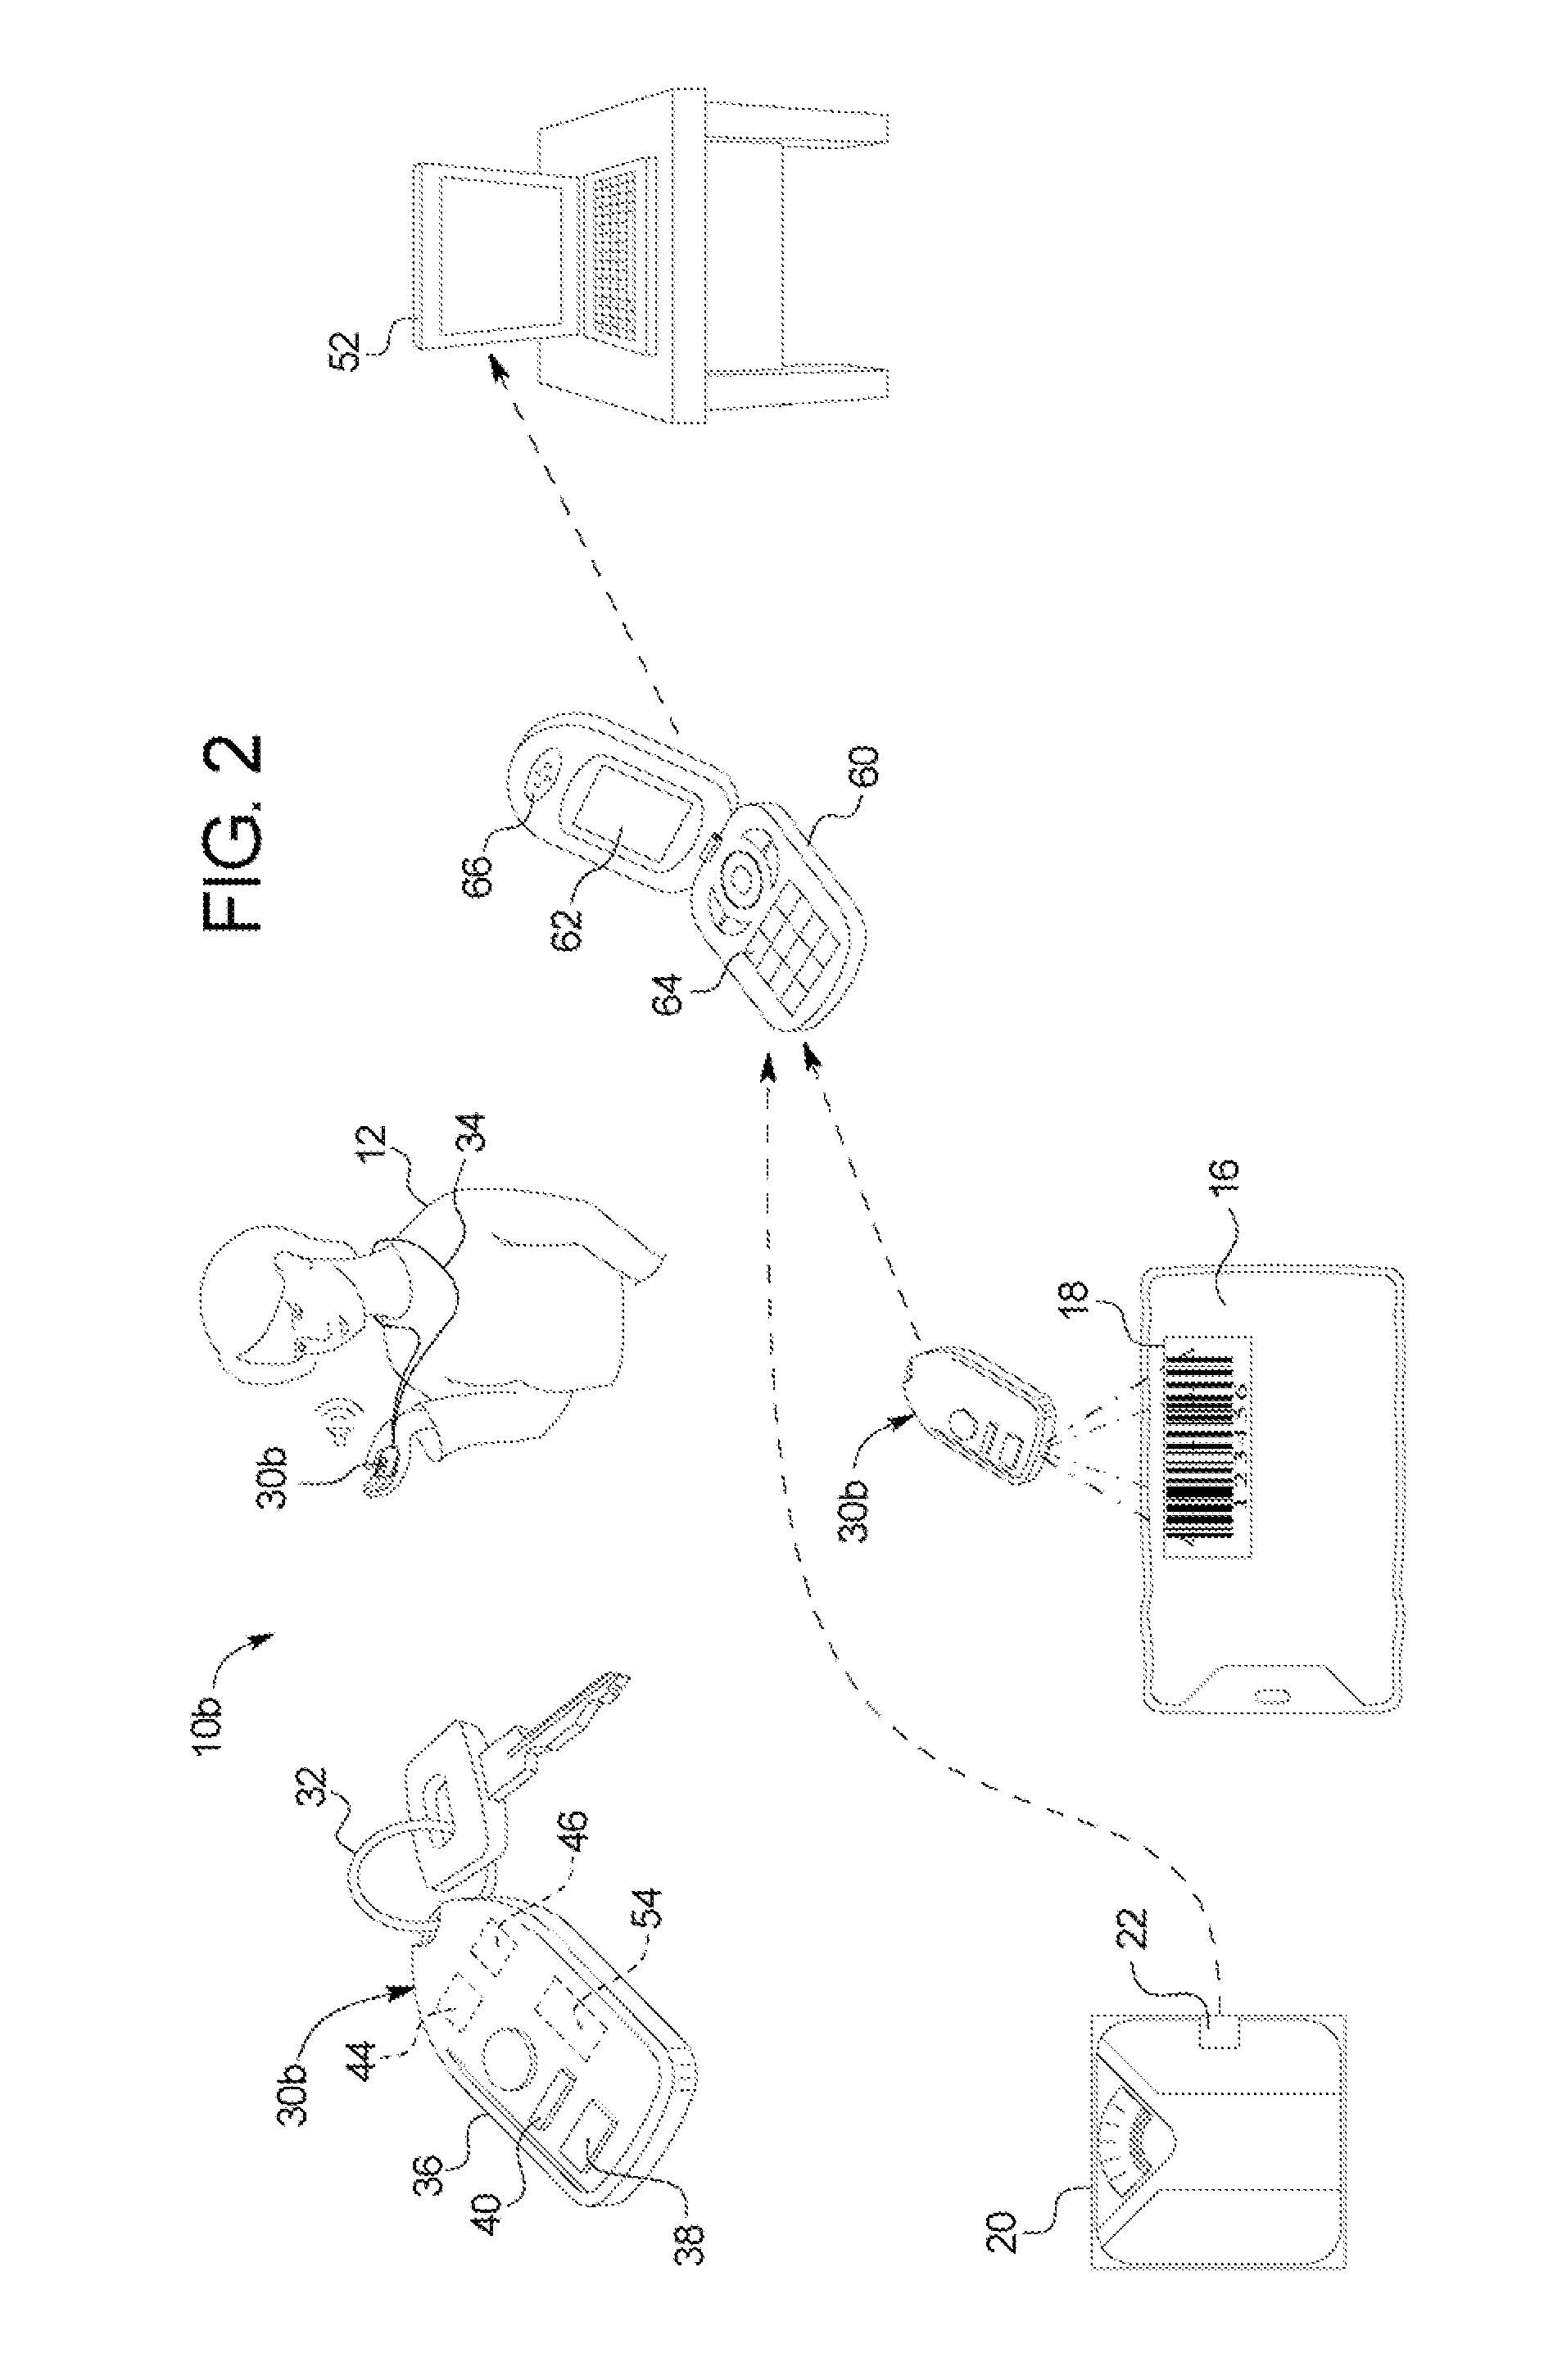 Peritoneal dialysis optimized using a patient hand-held scanning device